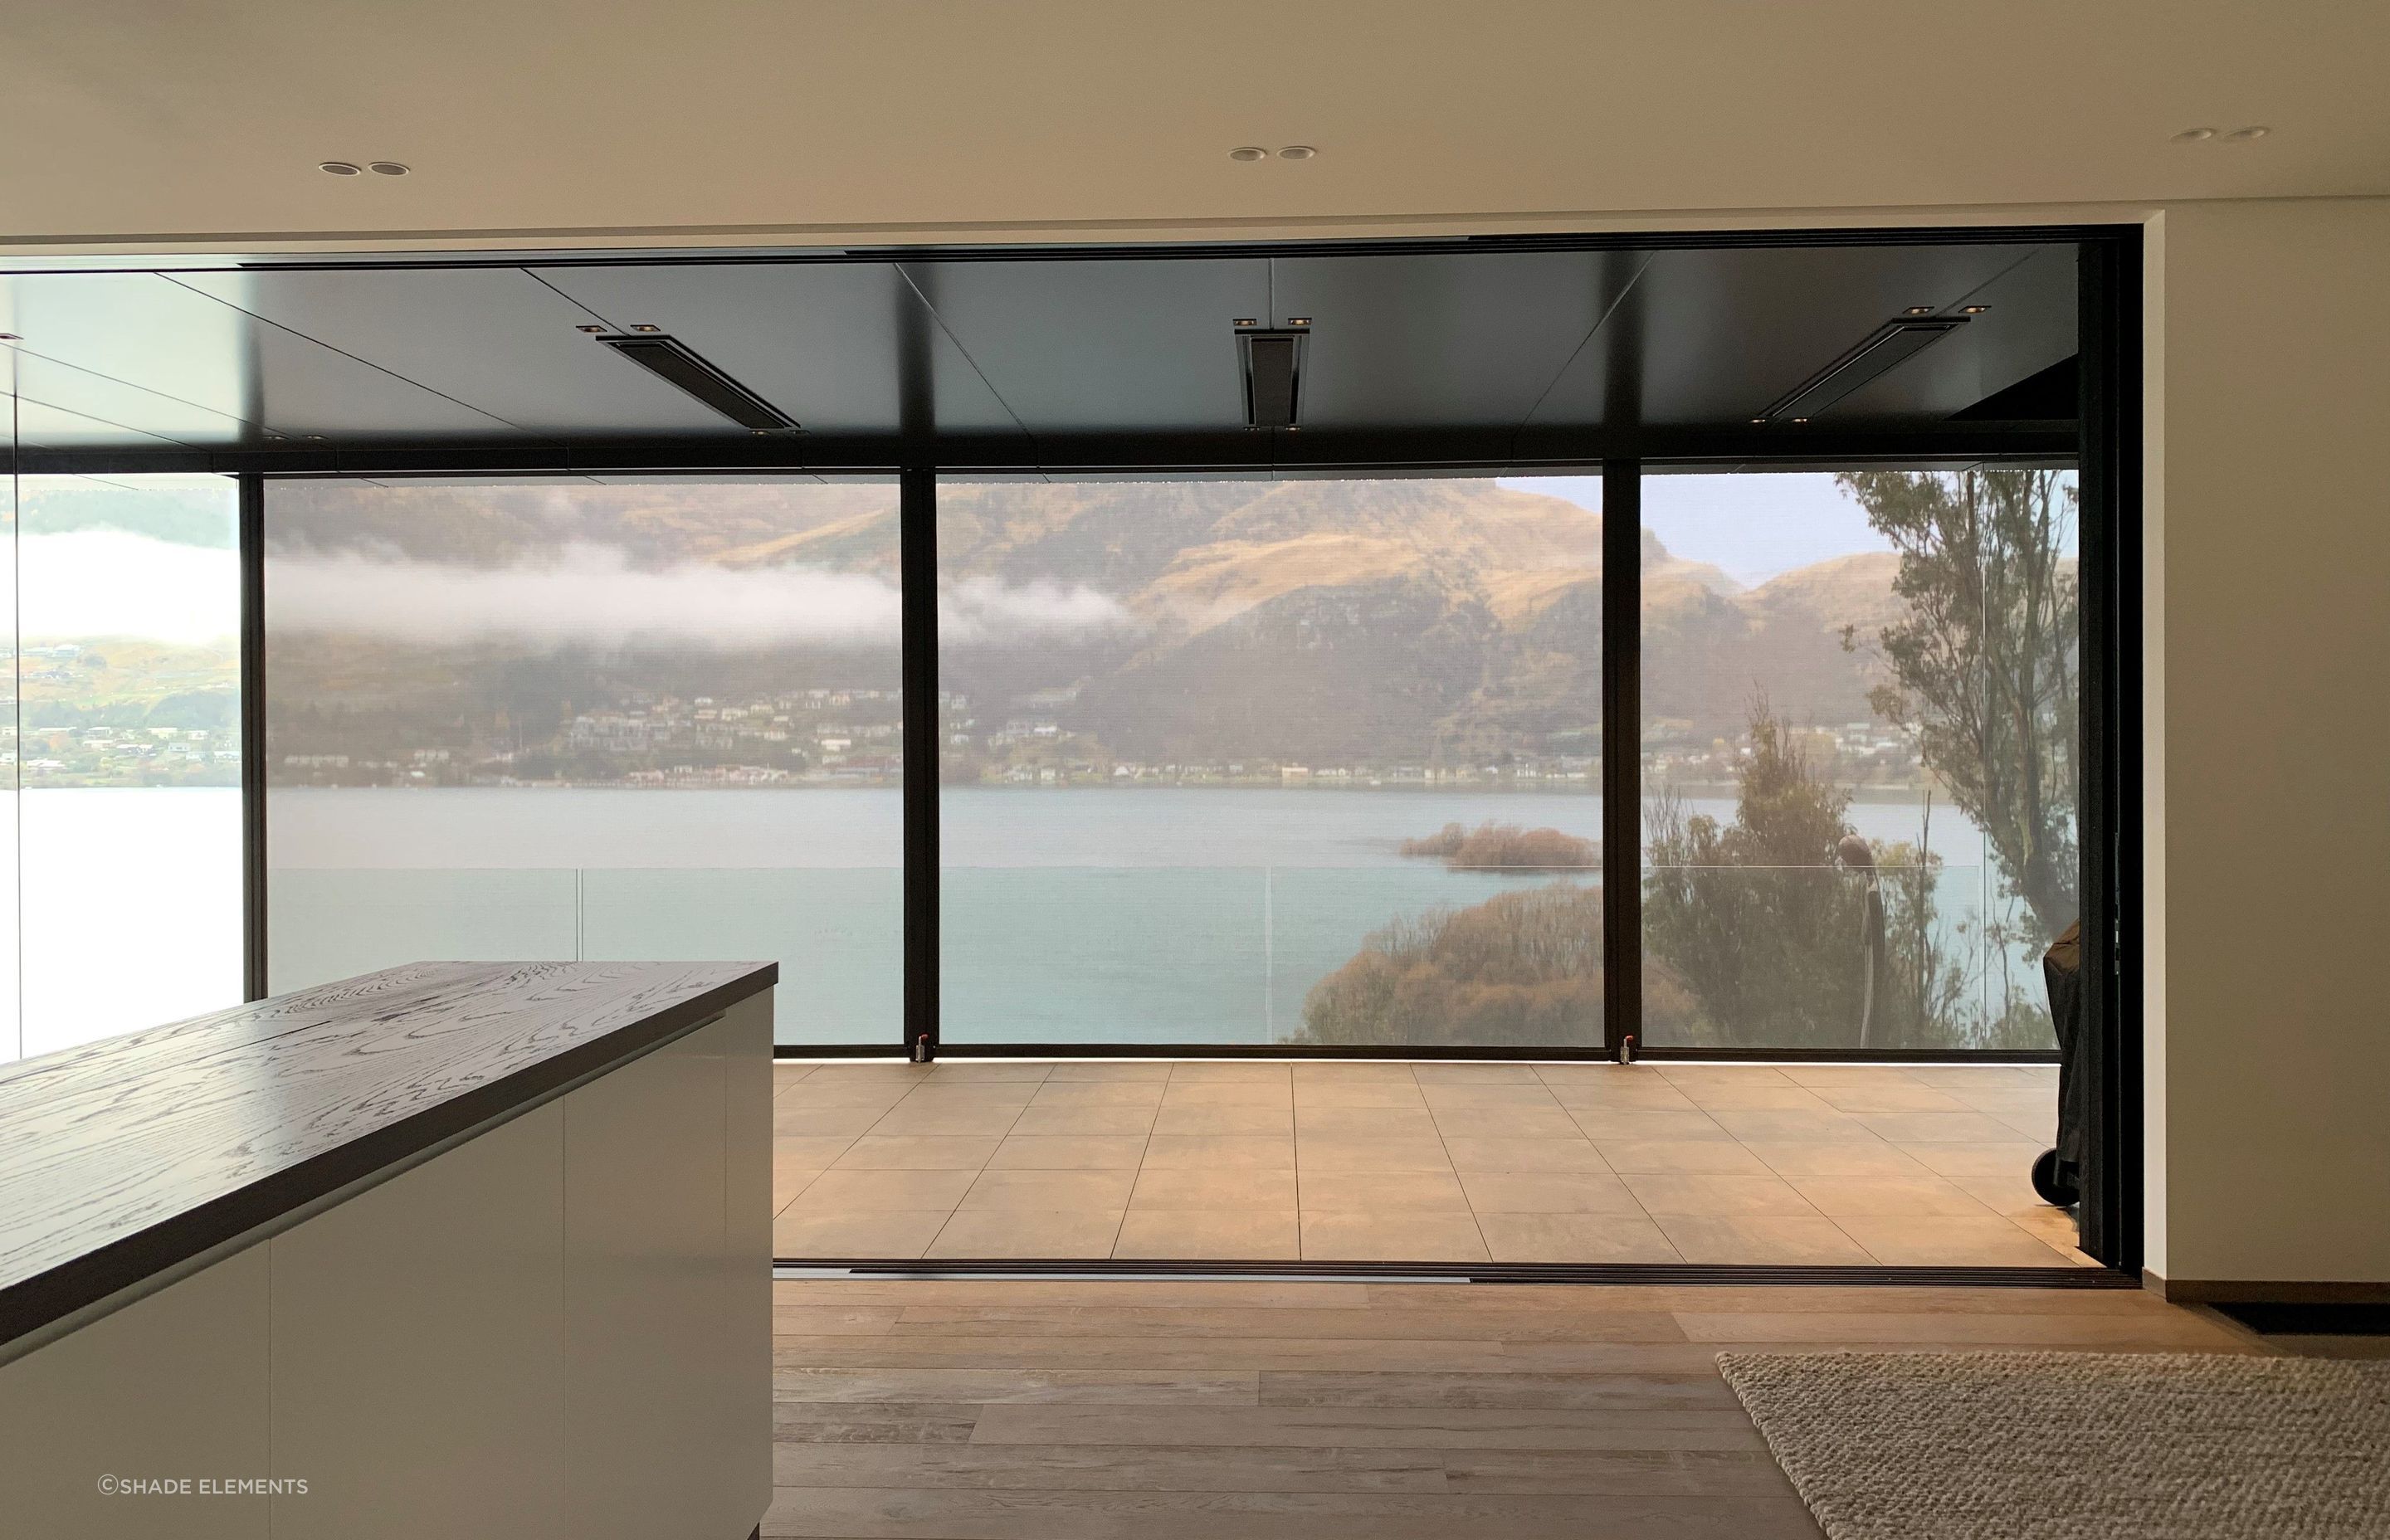 Protecting you while preserving the view - Ziptrak screens at their very best